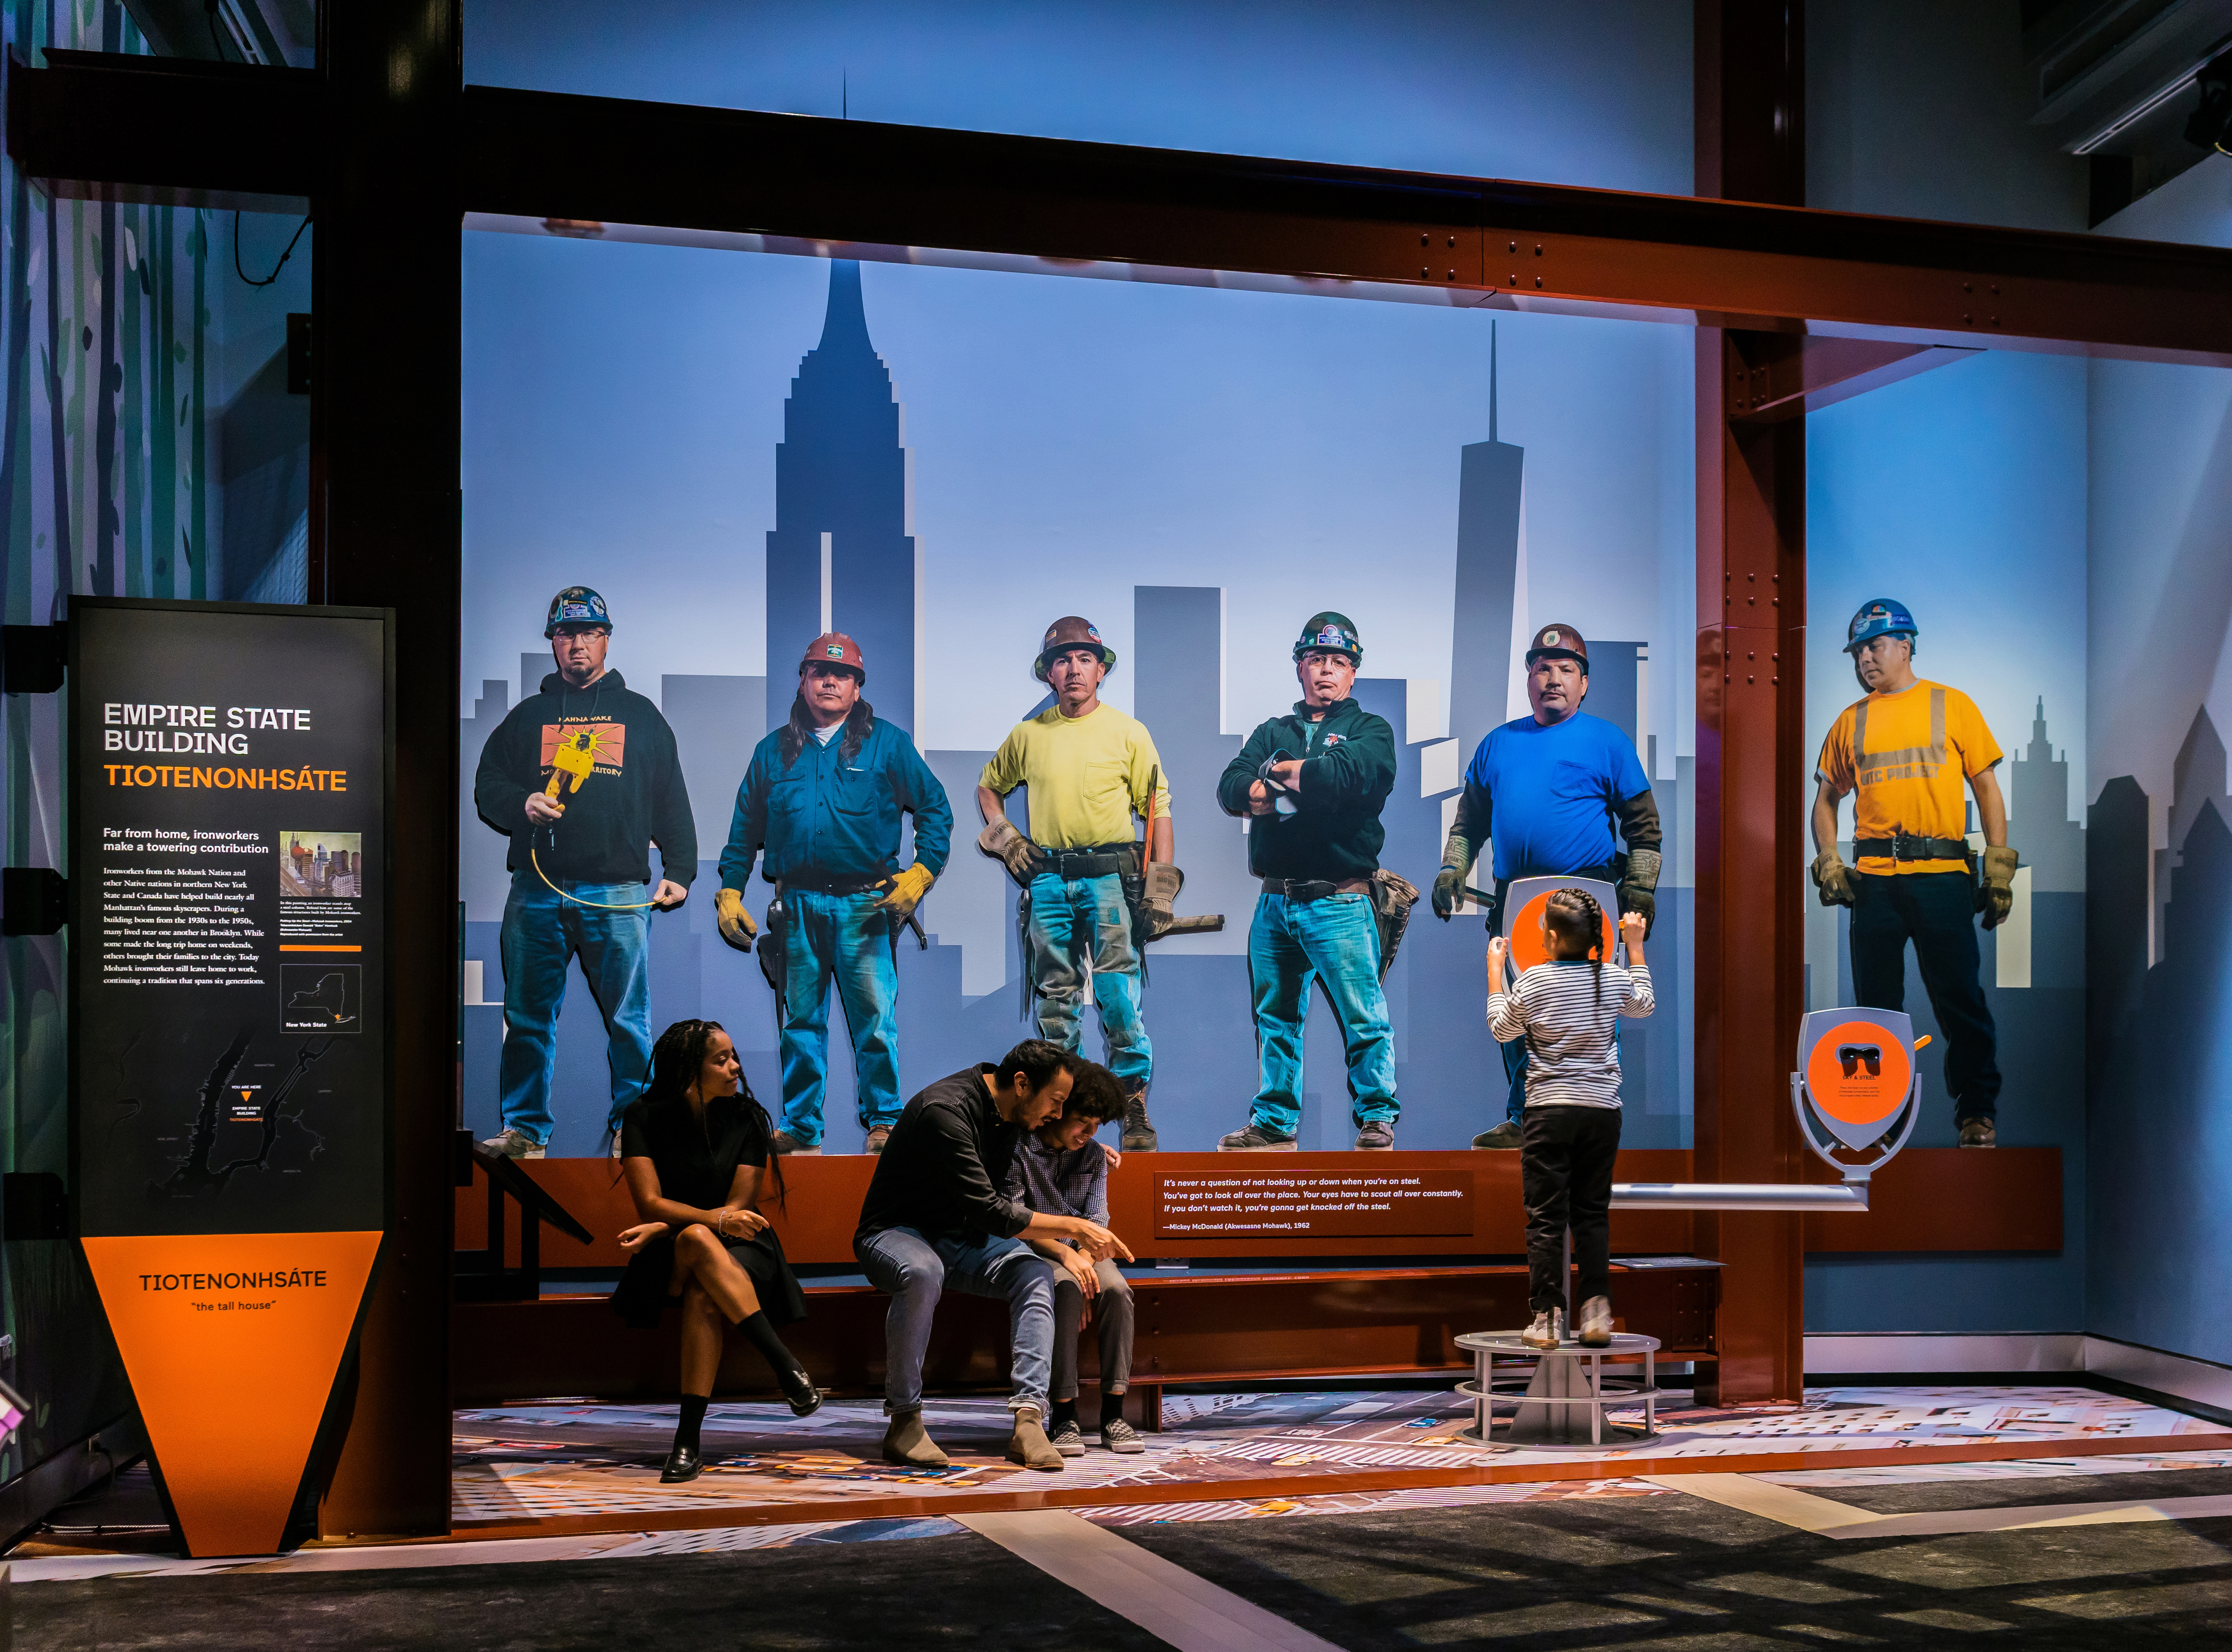 A portrait of several construction workers portraying ironworkers from several indigenous nations who helped build Manhattan's famous skyscrapers.